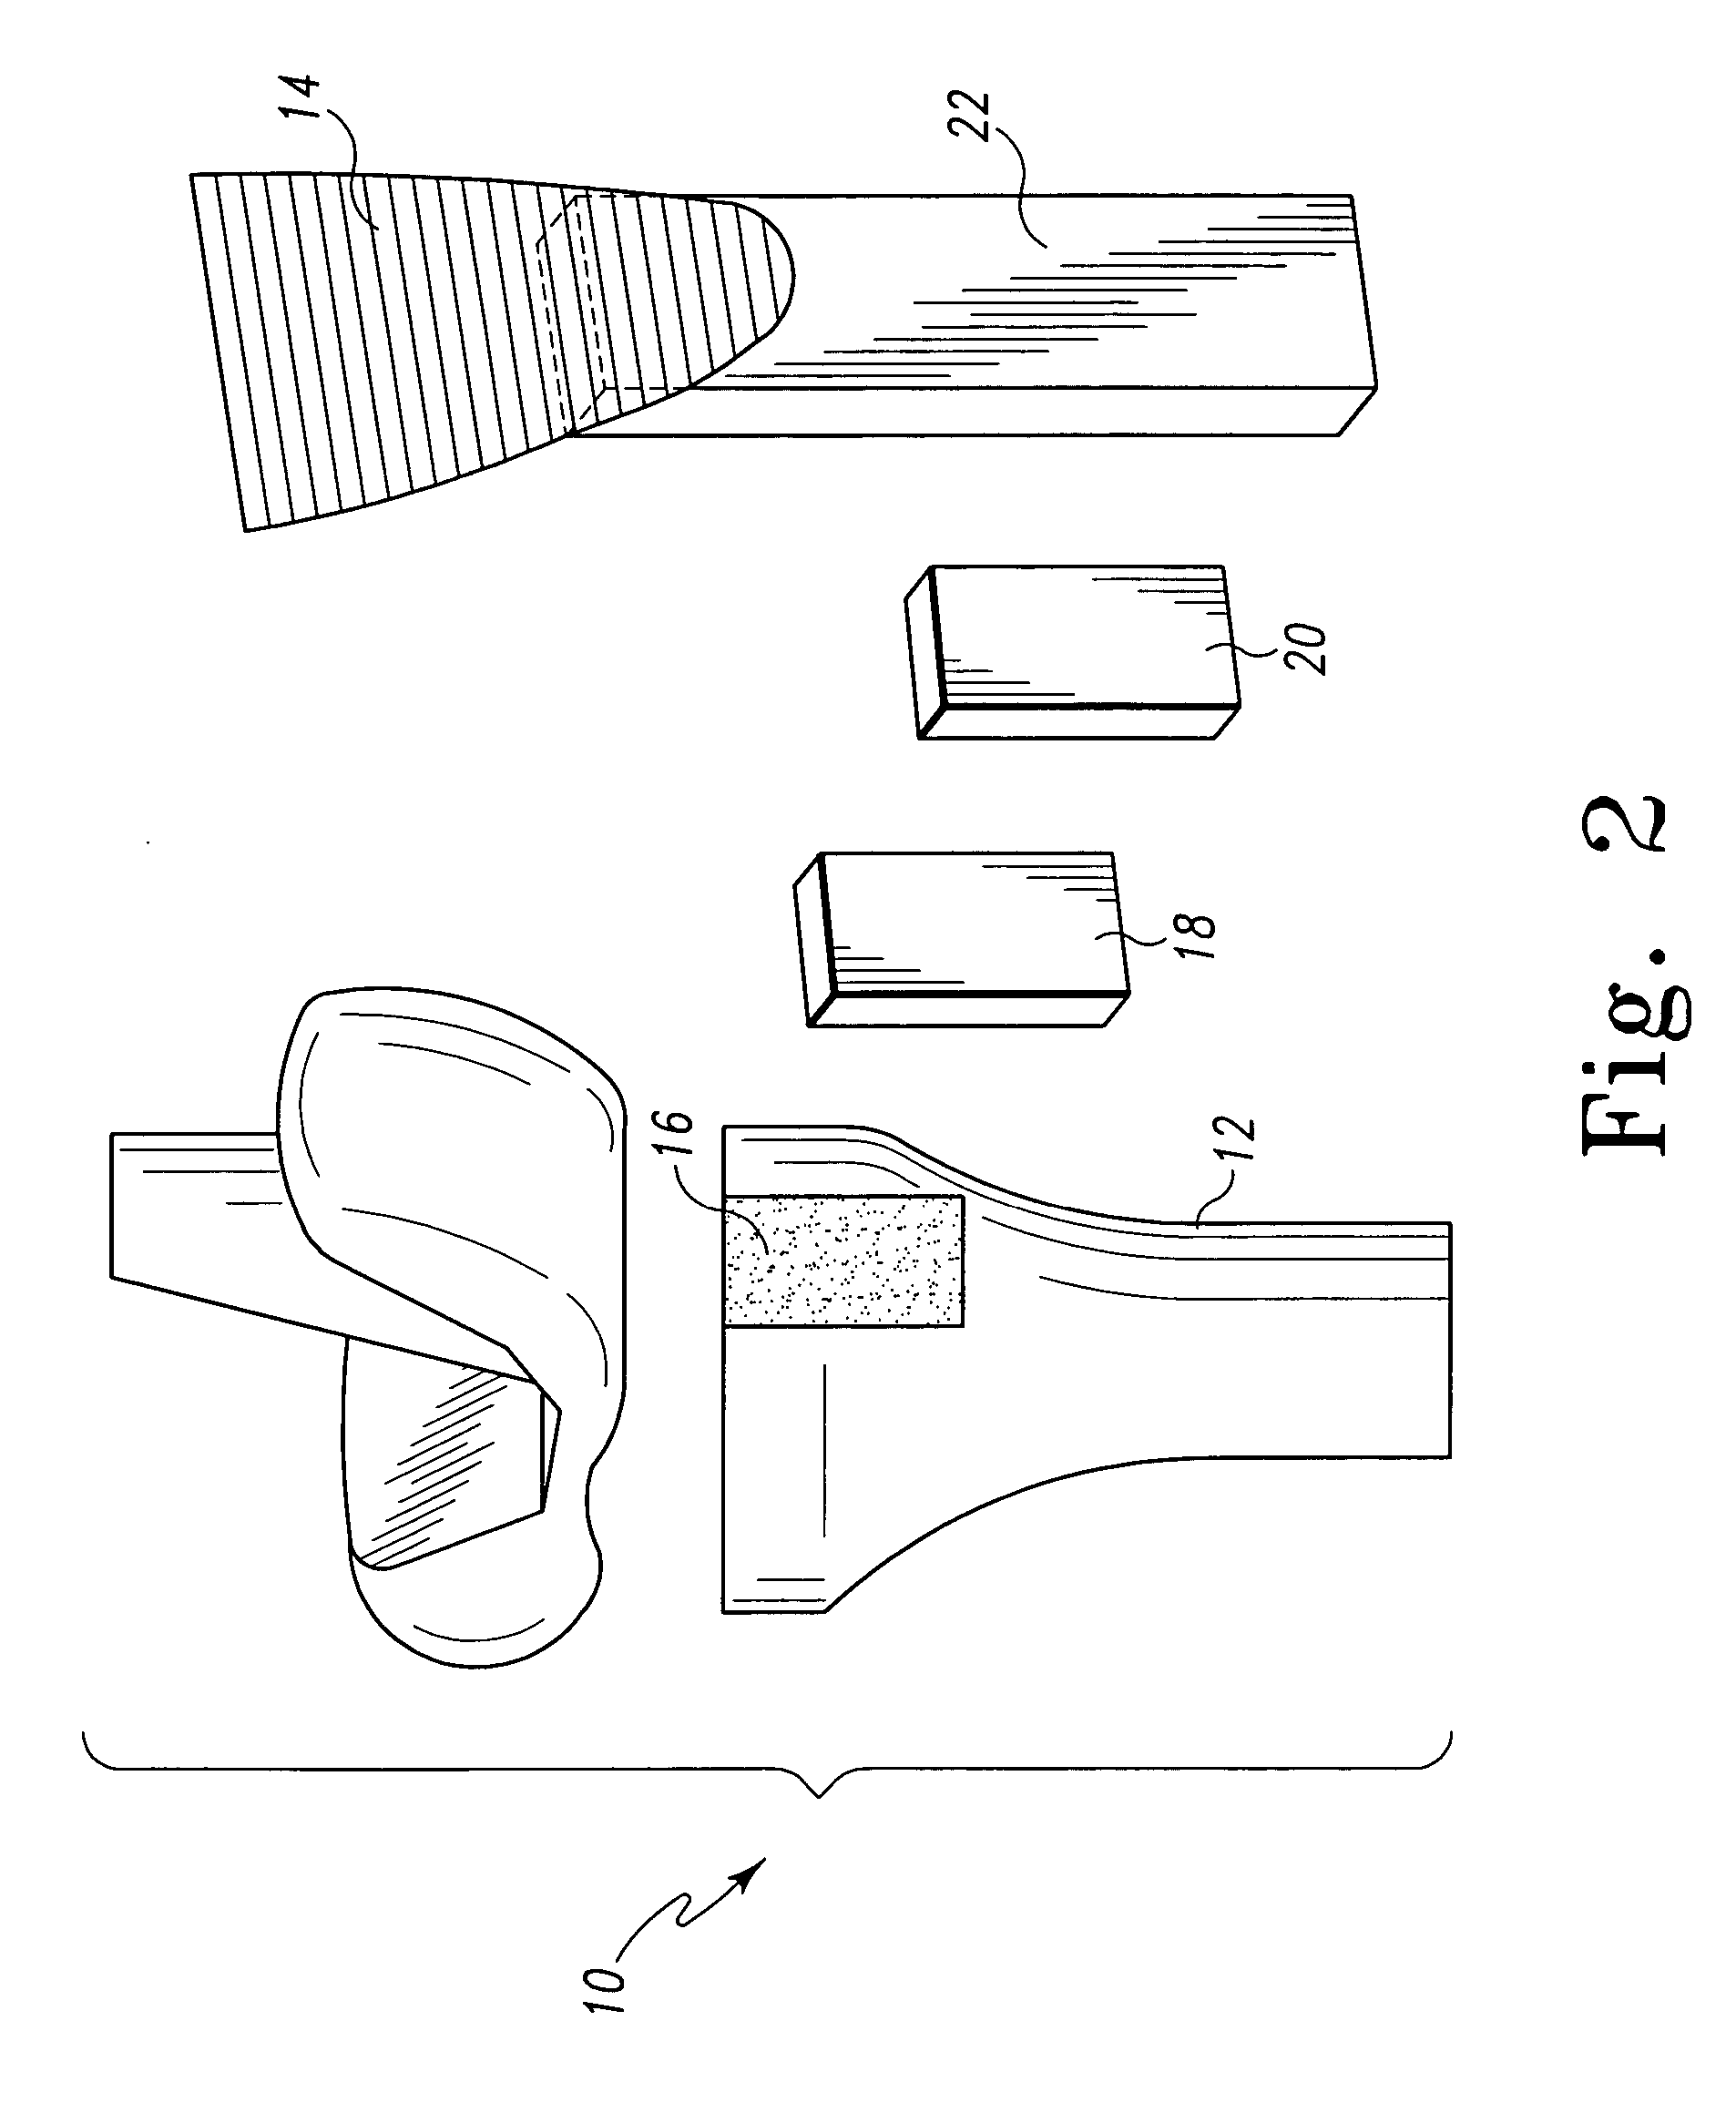 System and method for attaching soft tissue to an implant